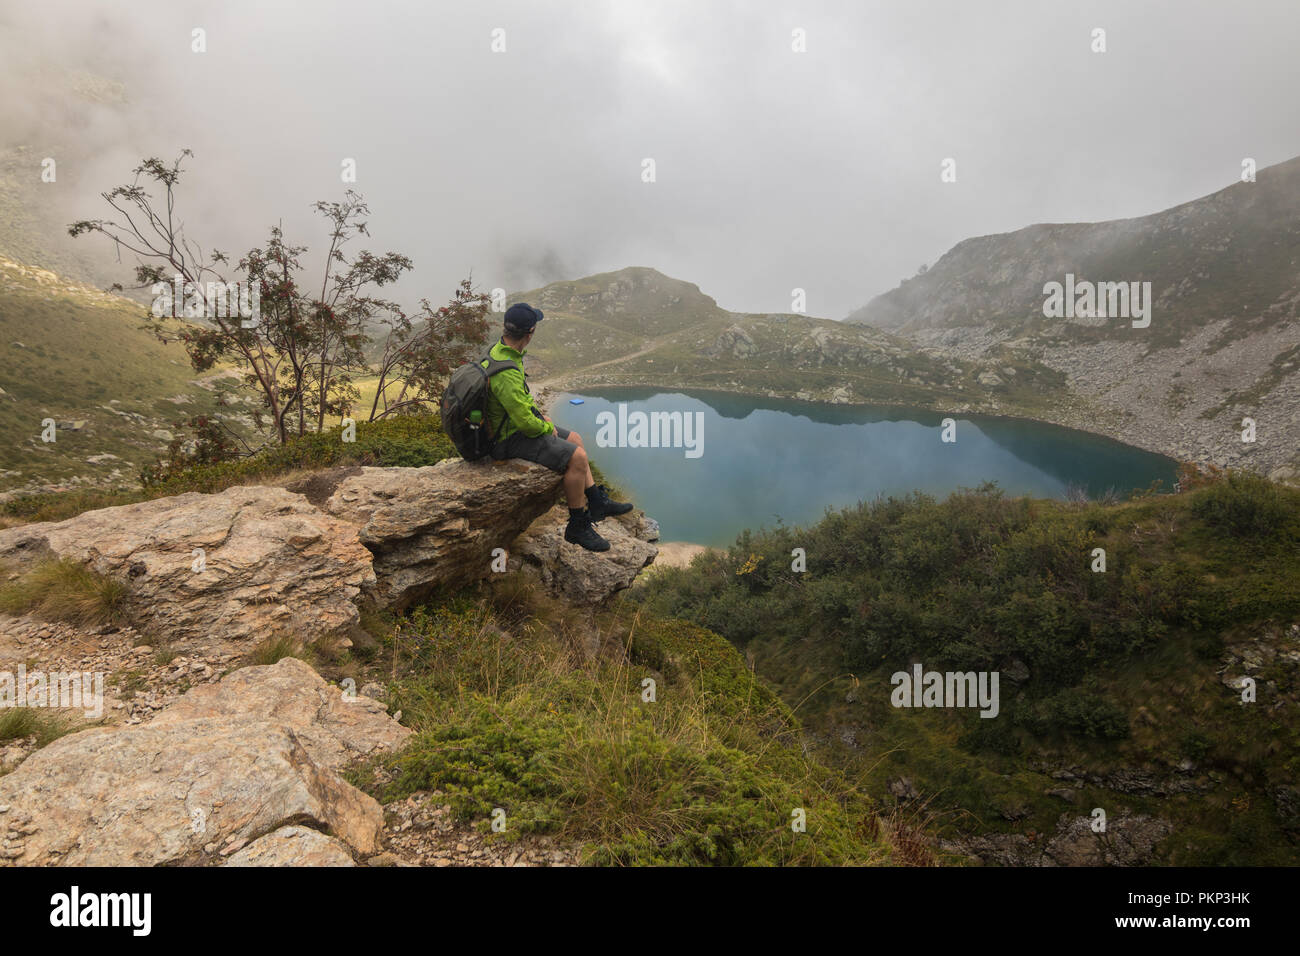 A man hiker hiking mountain with a backpack trails outdoors lifestyle landscape scenery backpacking rucksack Stock Photo